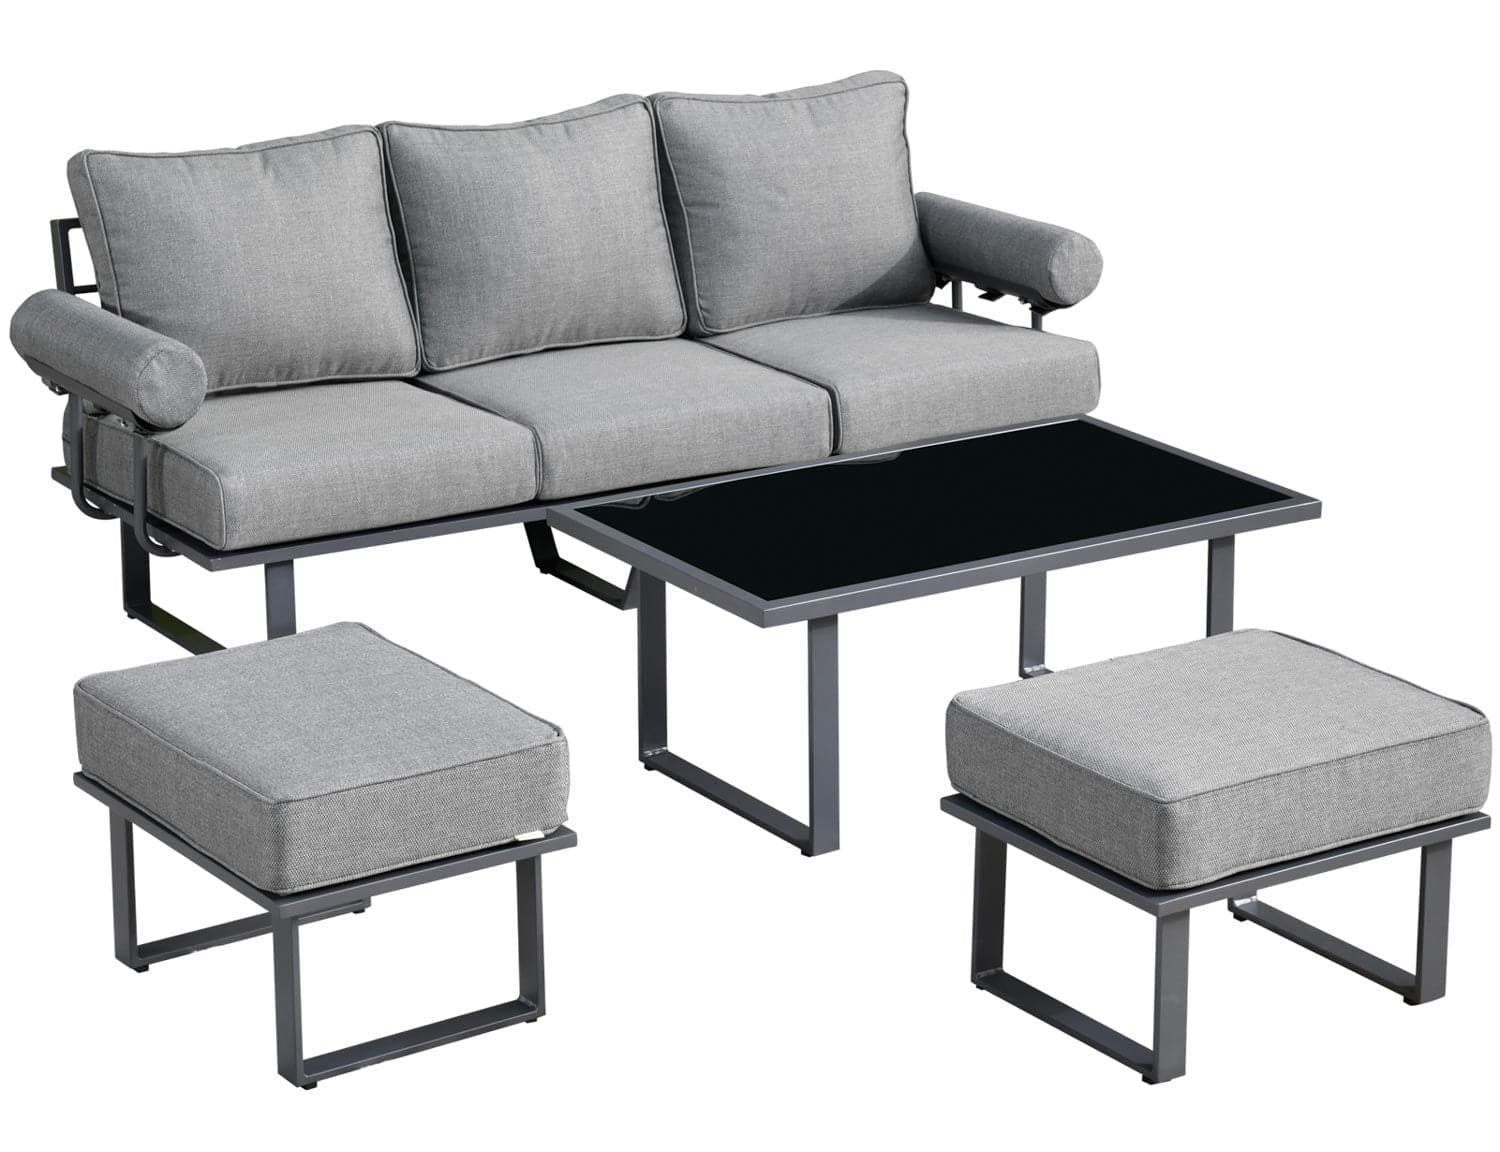 Ovios Aluminum Patio Furniture Set 6-Piece with Table and Ottoman